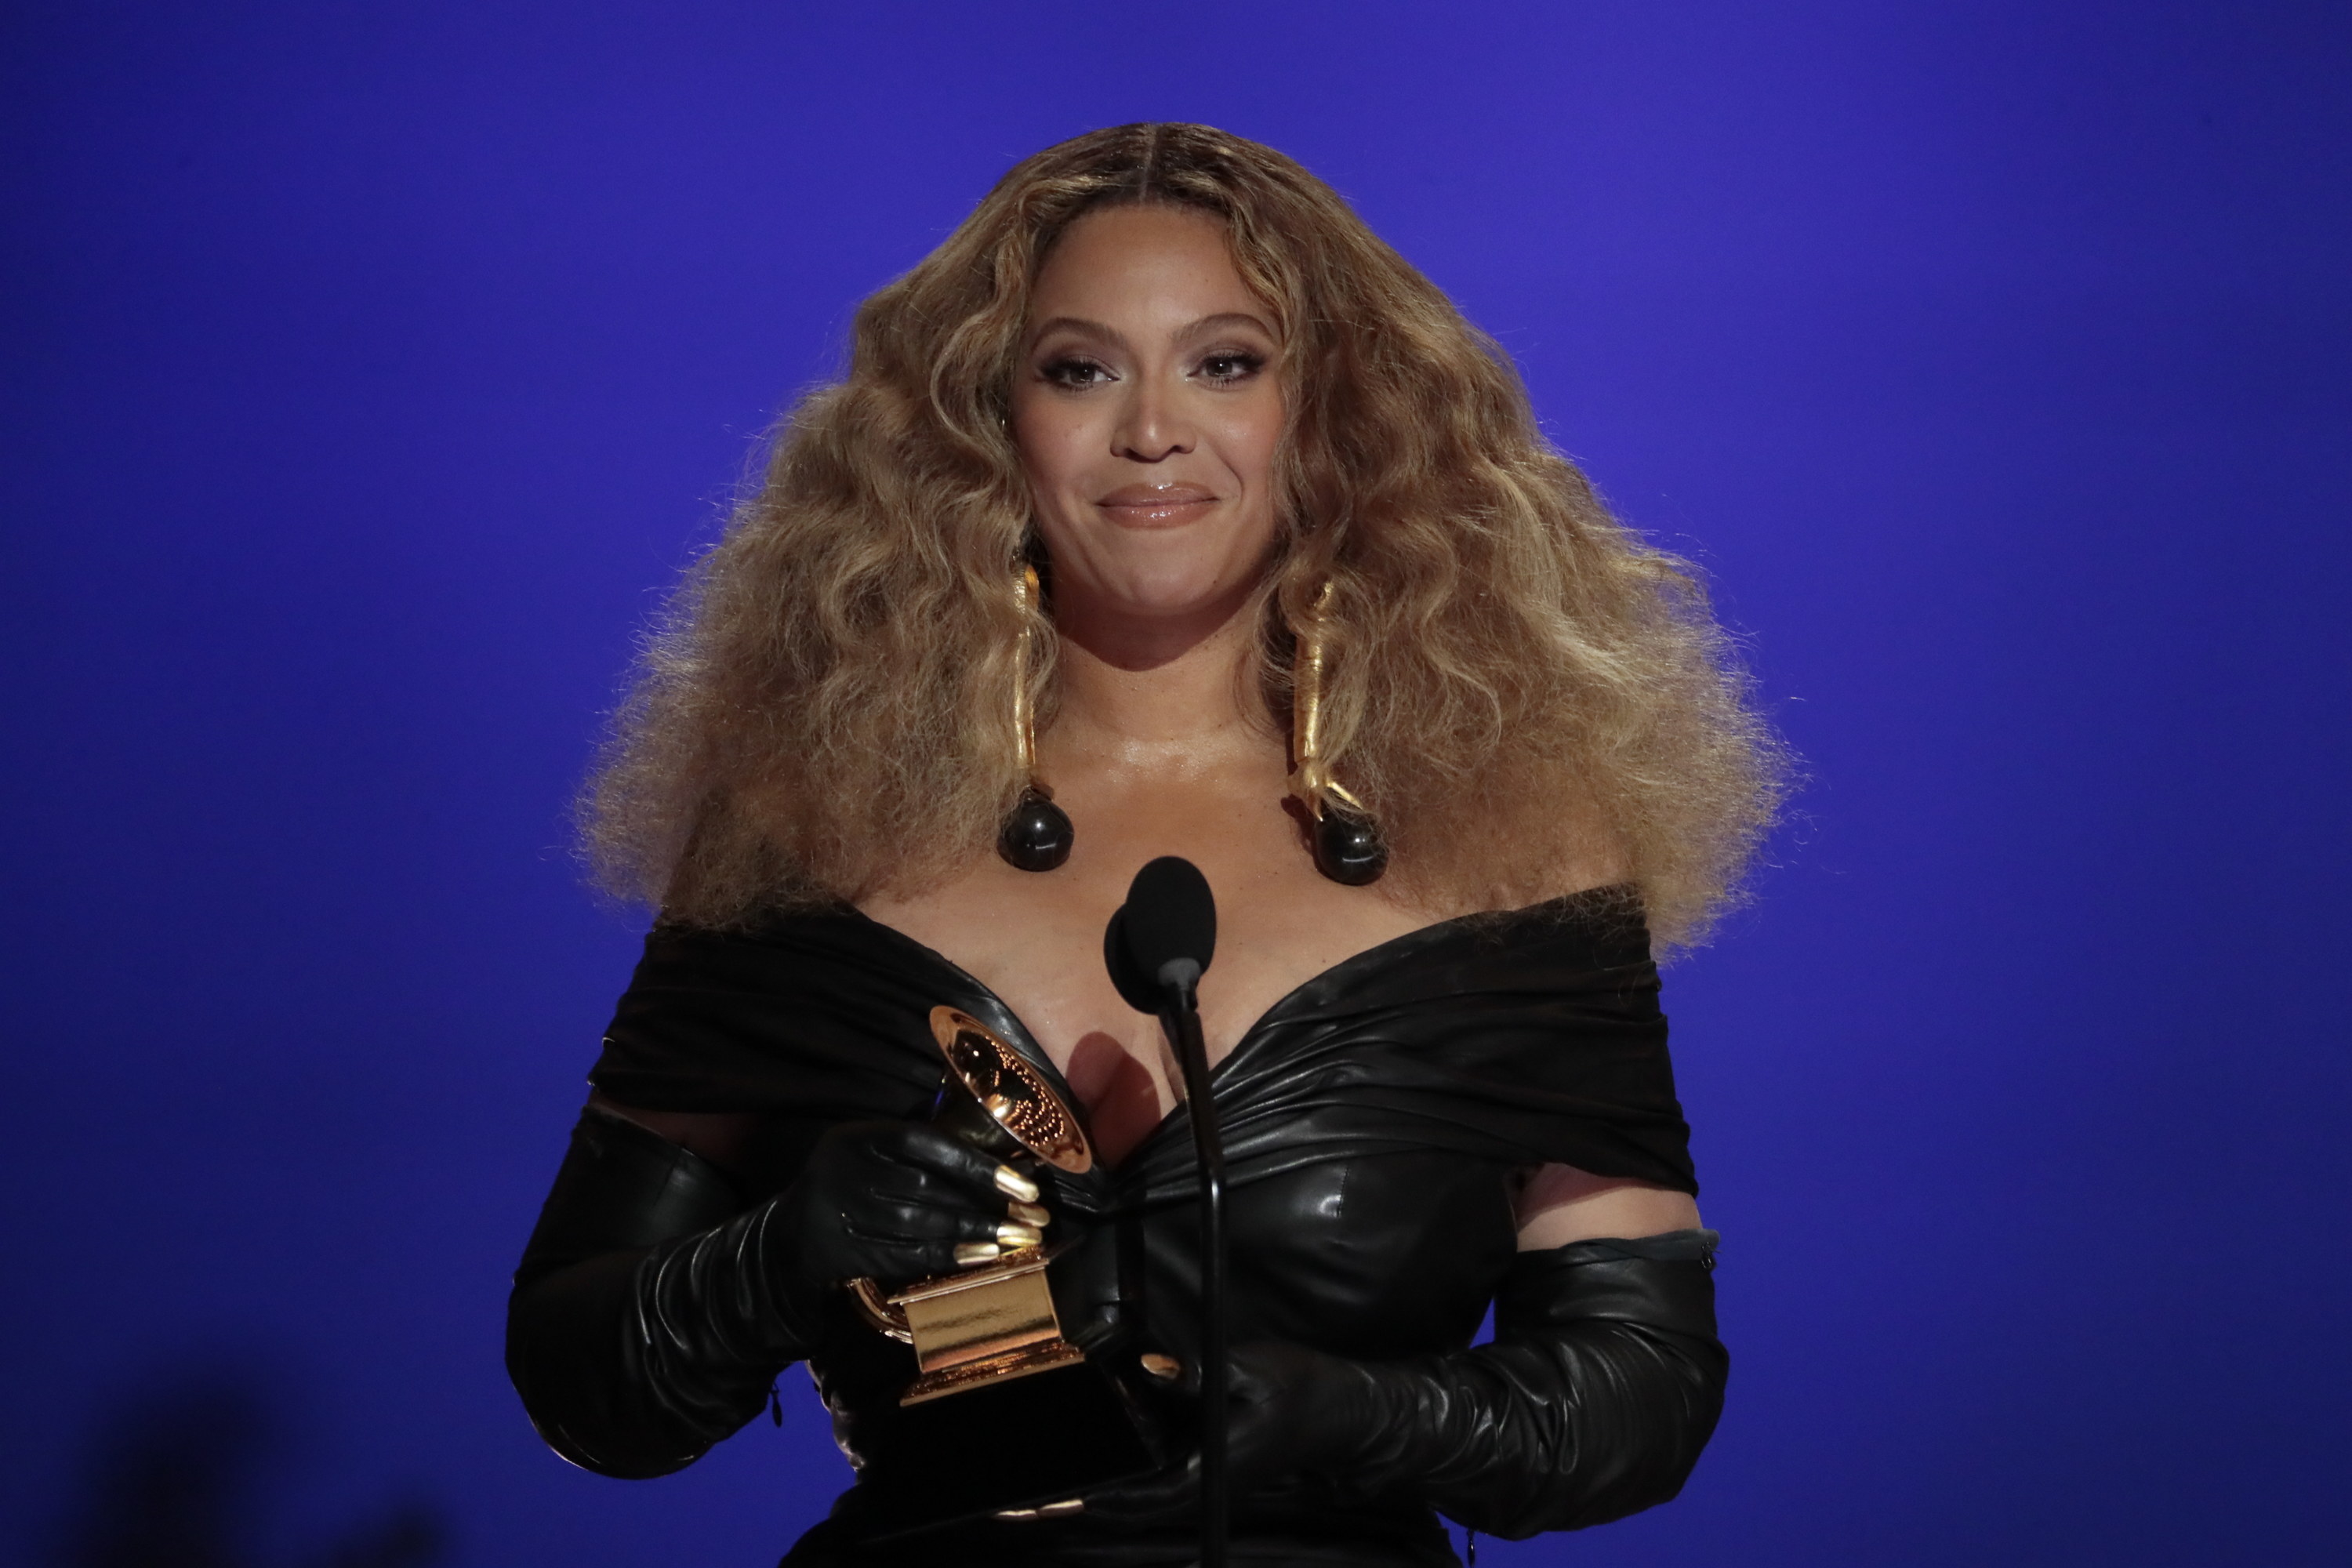 Beyoncé wearing an off-shouder leather like dress as she accepts a Grammy